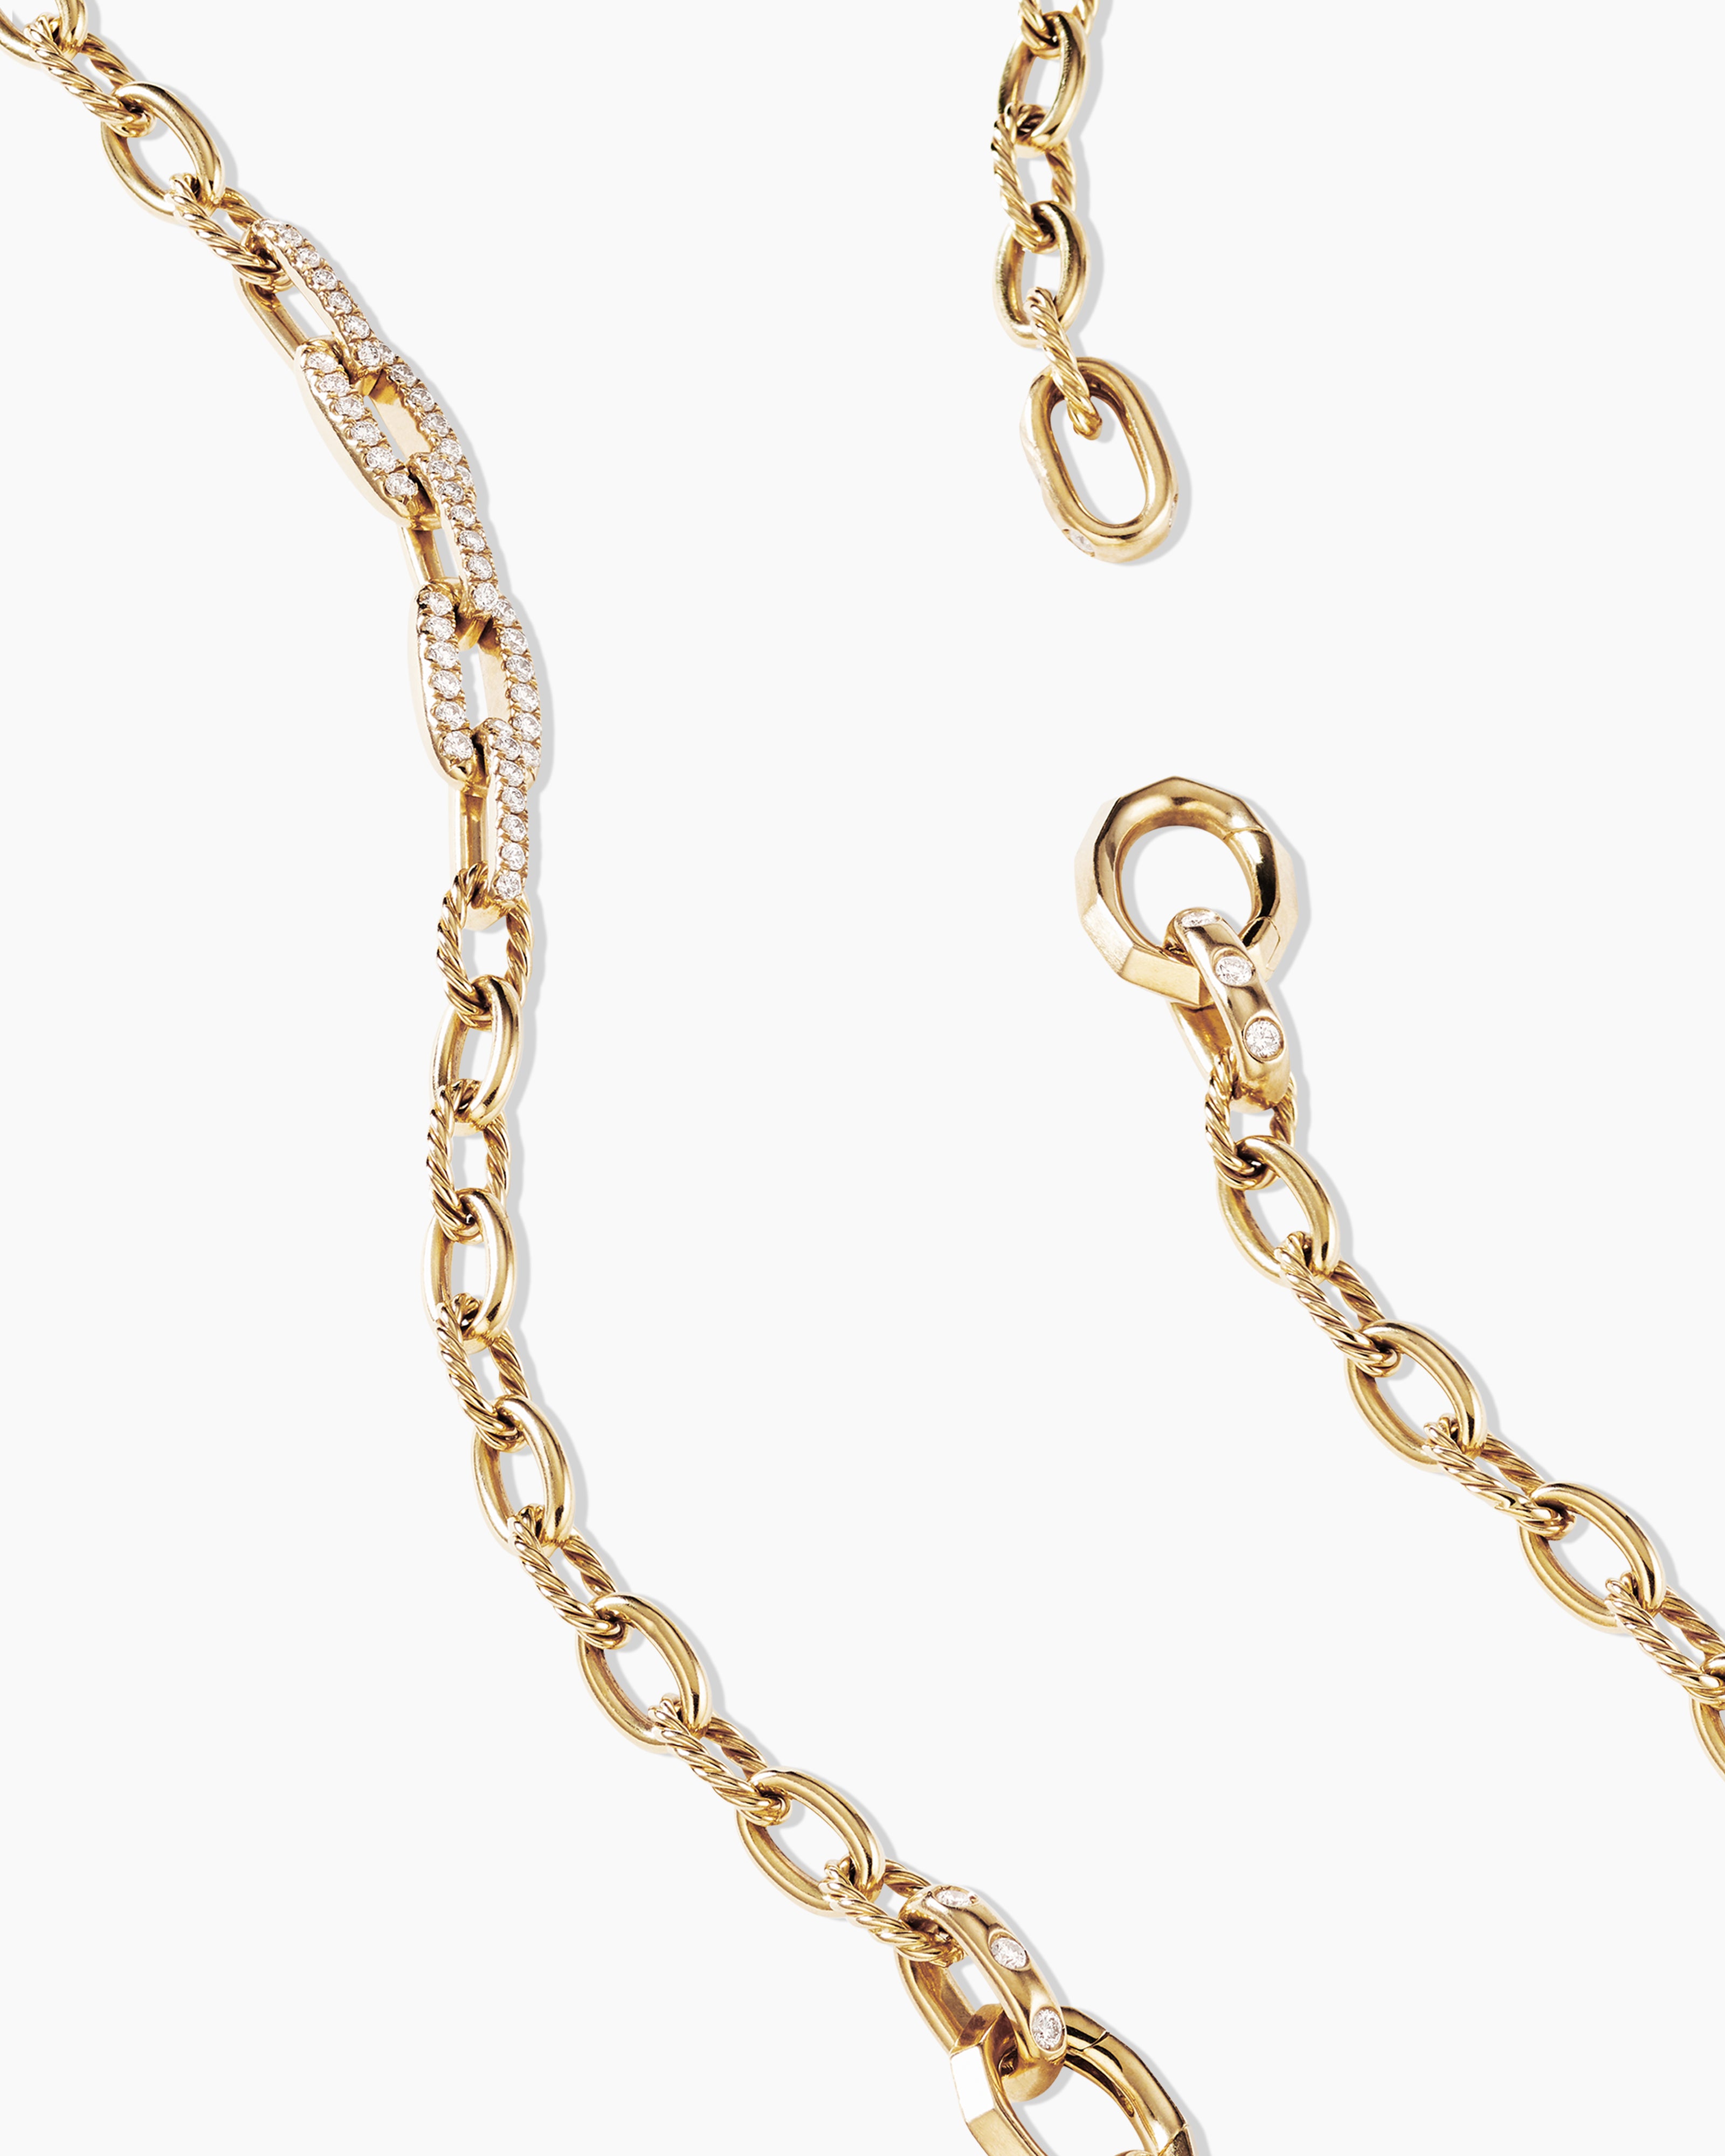 Stax Convertible Chain Necklace in Yurman Yellow | Gold David 18K with Diamonds, 5mm